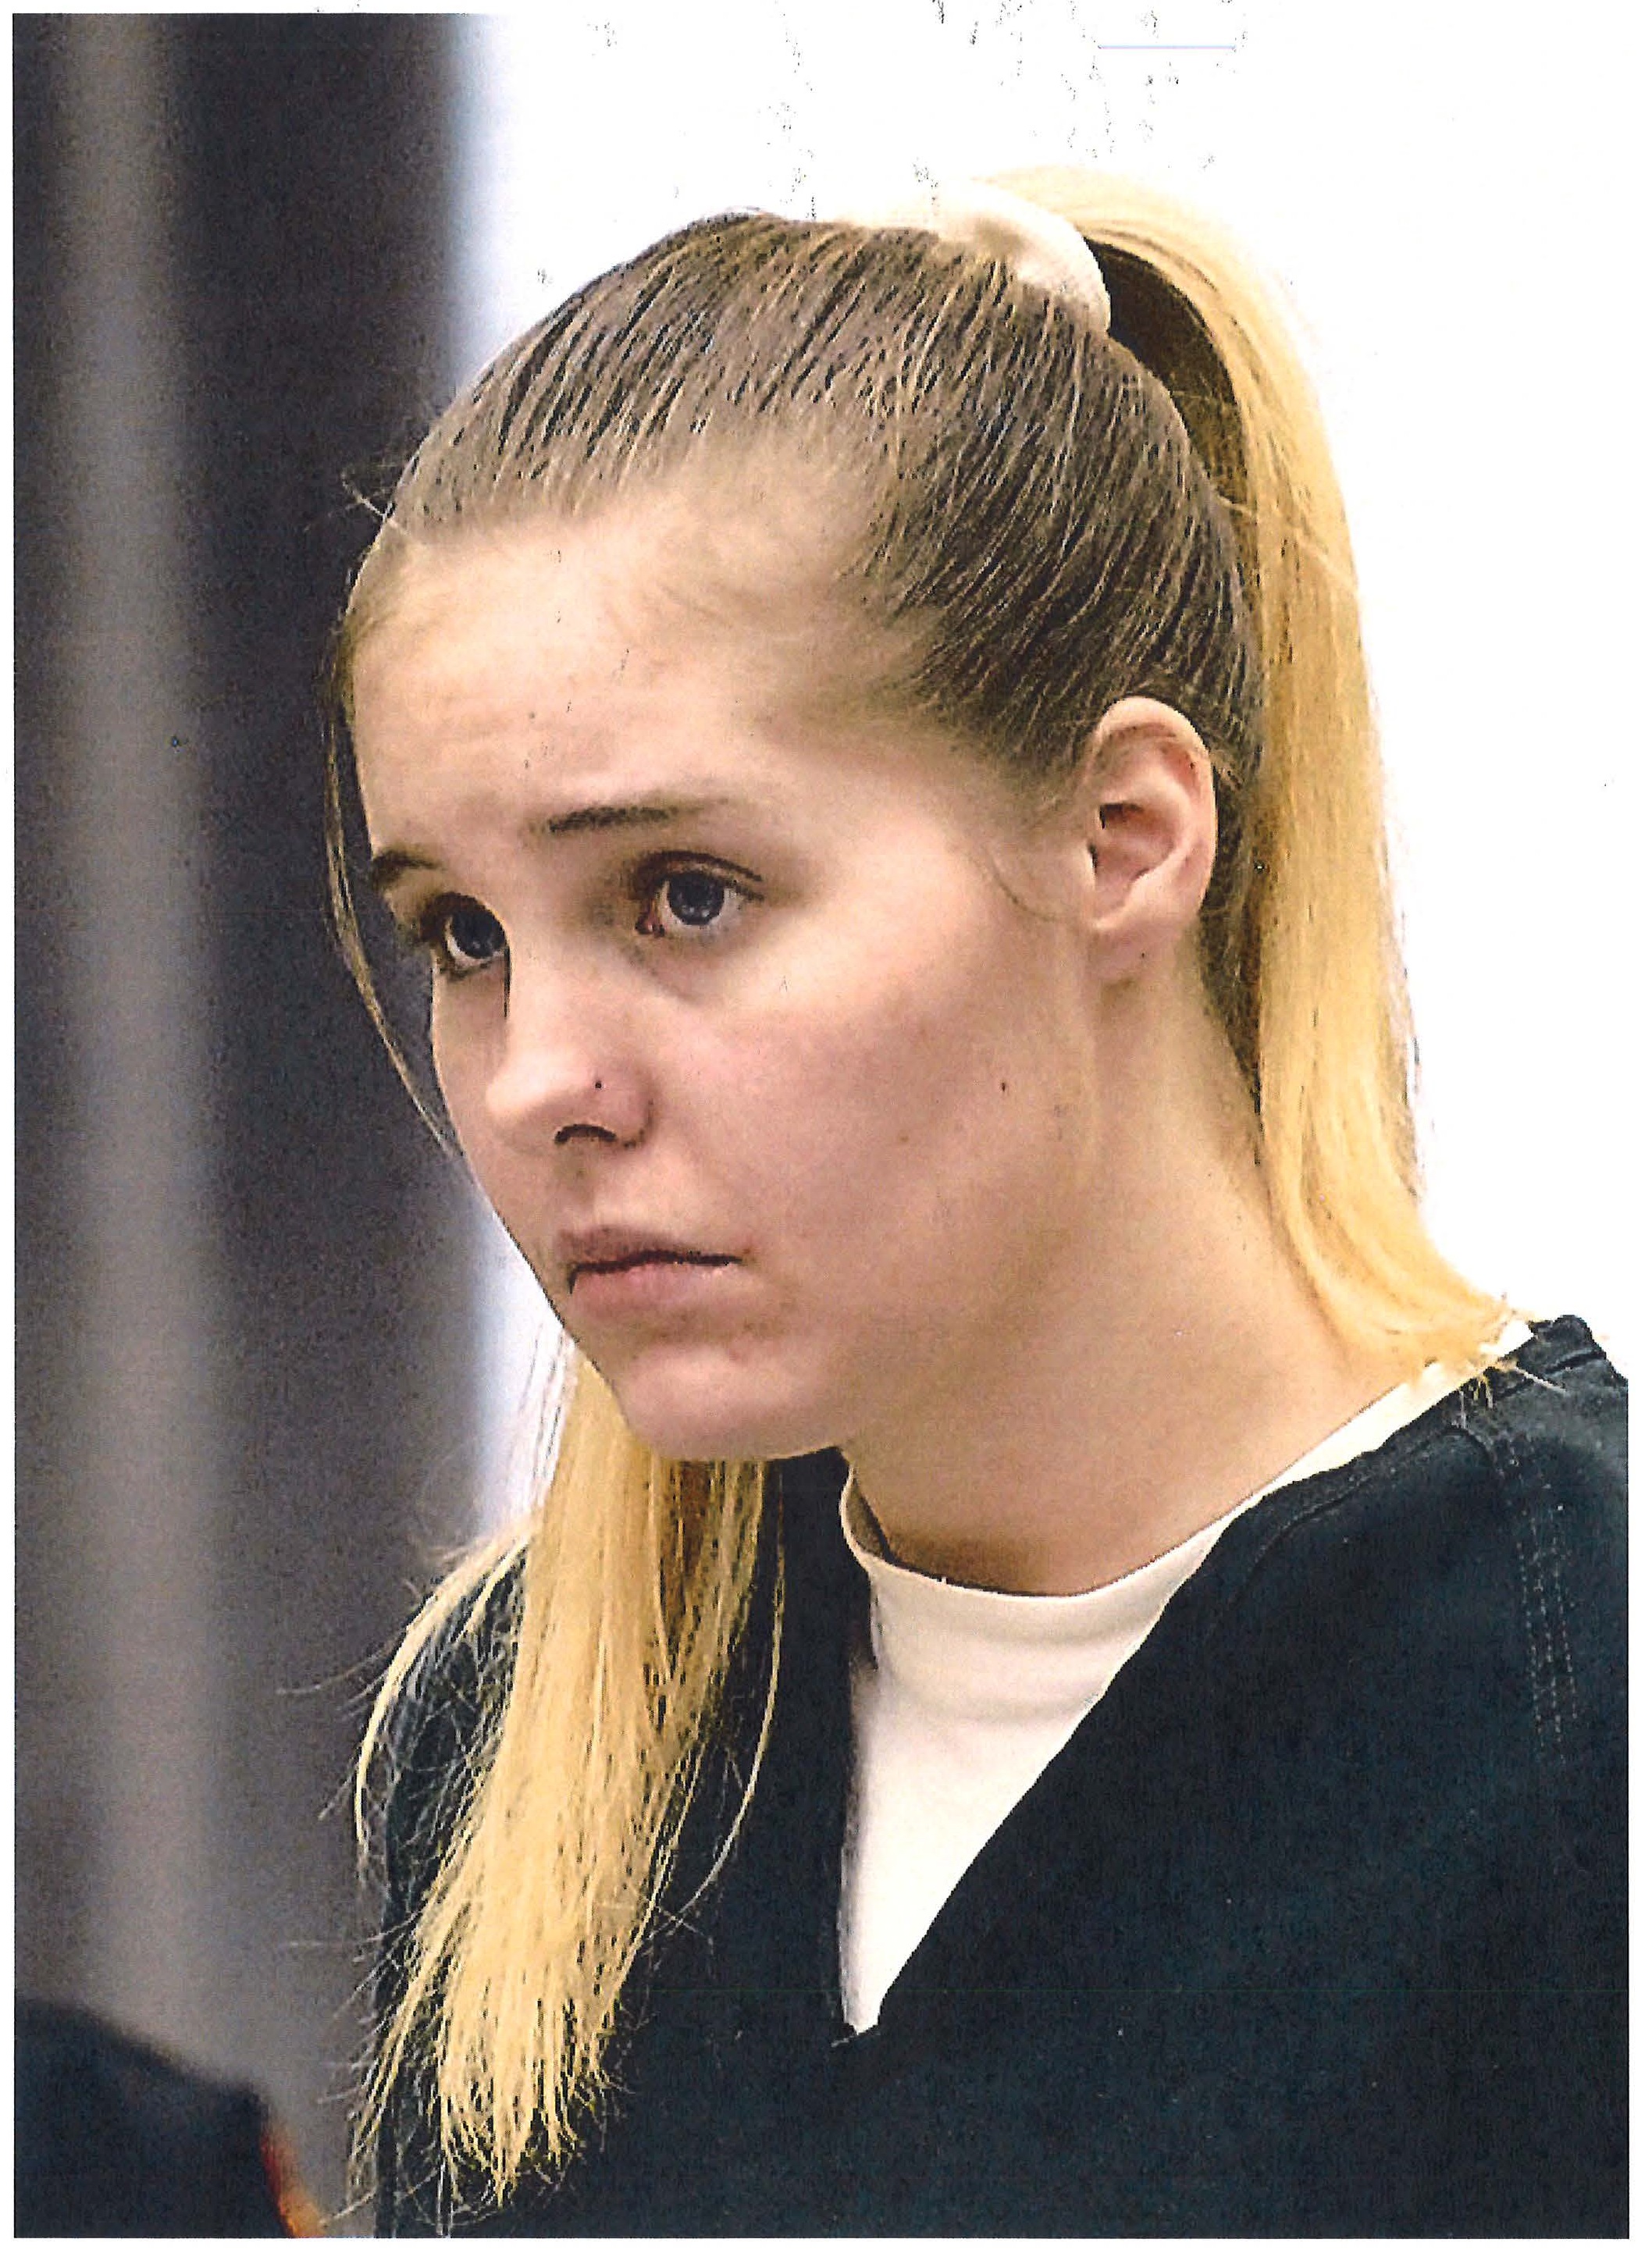 Krystal Riordan at her bail hearing after being arrested